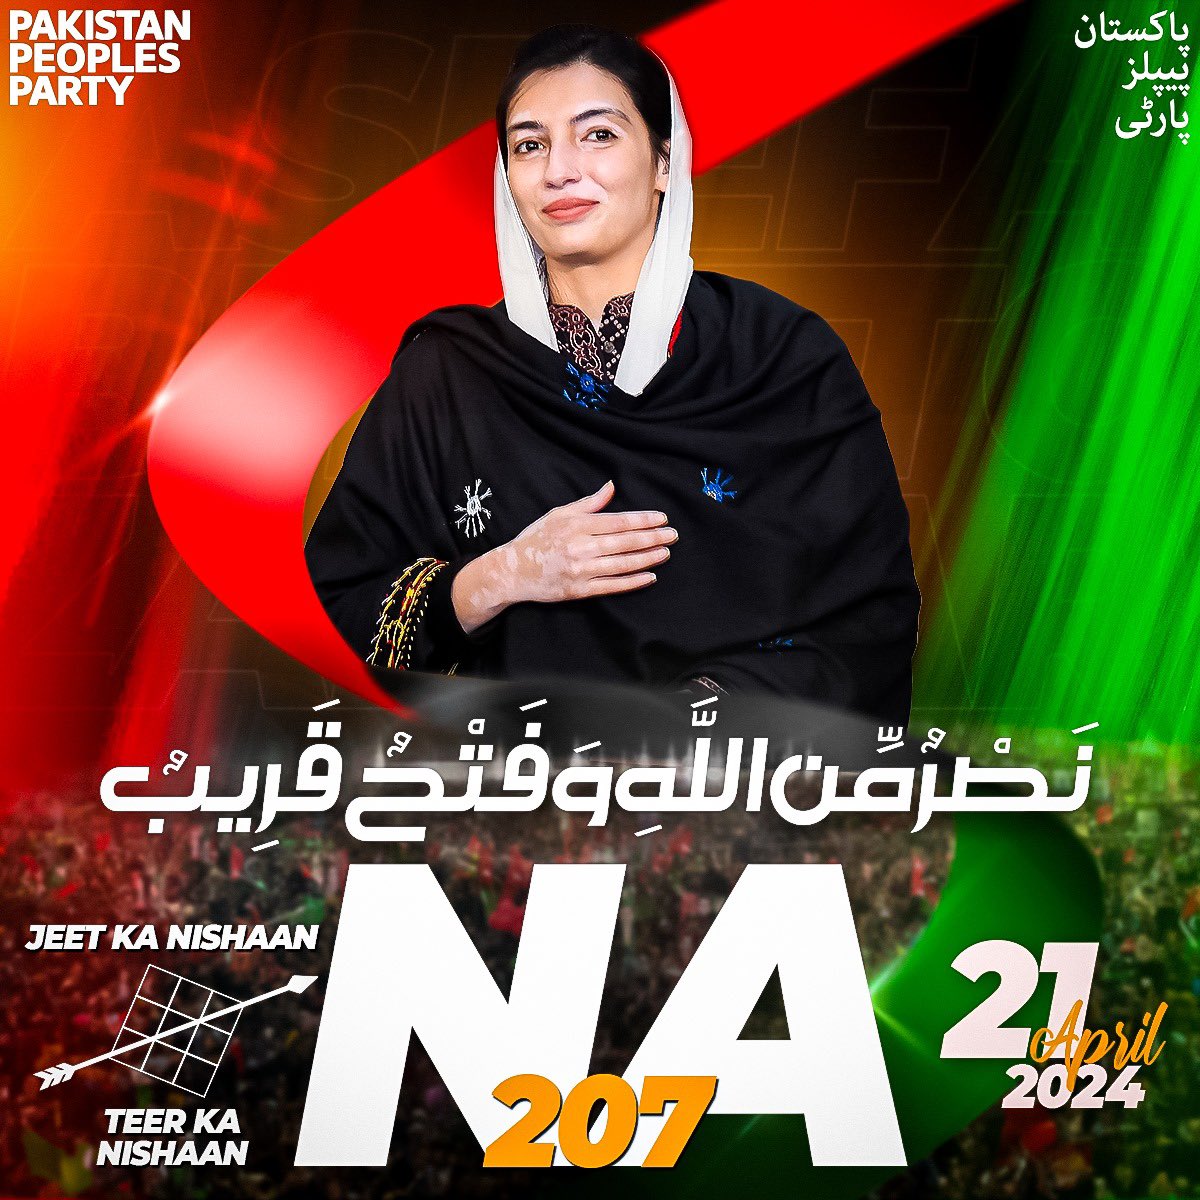 Heartfelt congratulations to BiBi @AseefaBZ for her unopposed declaration from NA207 SBA.This decisive outcome not only reflects the unwavering endorsement of the Pak PPP but also symbolizes the deep-rooted trust and confidence placed in her by the people of Pakistan.